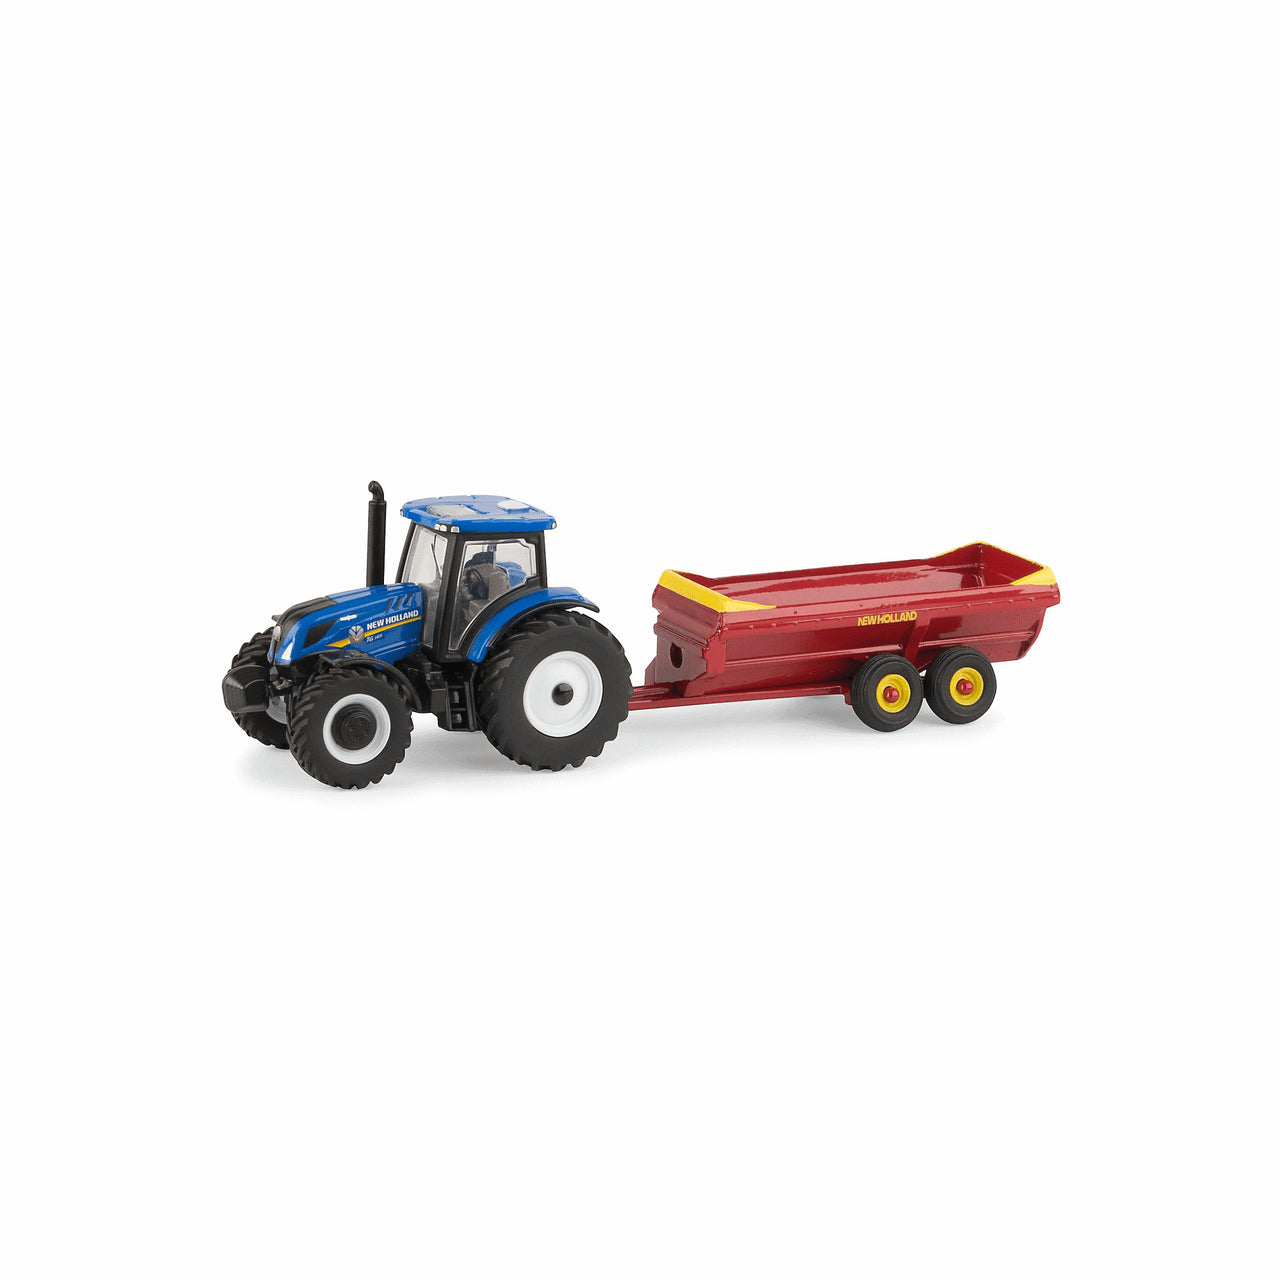 Big Farm New Holland 1:64 Scale T6.165 Tractor with V-Tank Spreader Farm Toy-JOHN DEERE-Little Giant Kidz